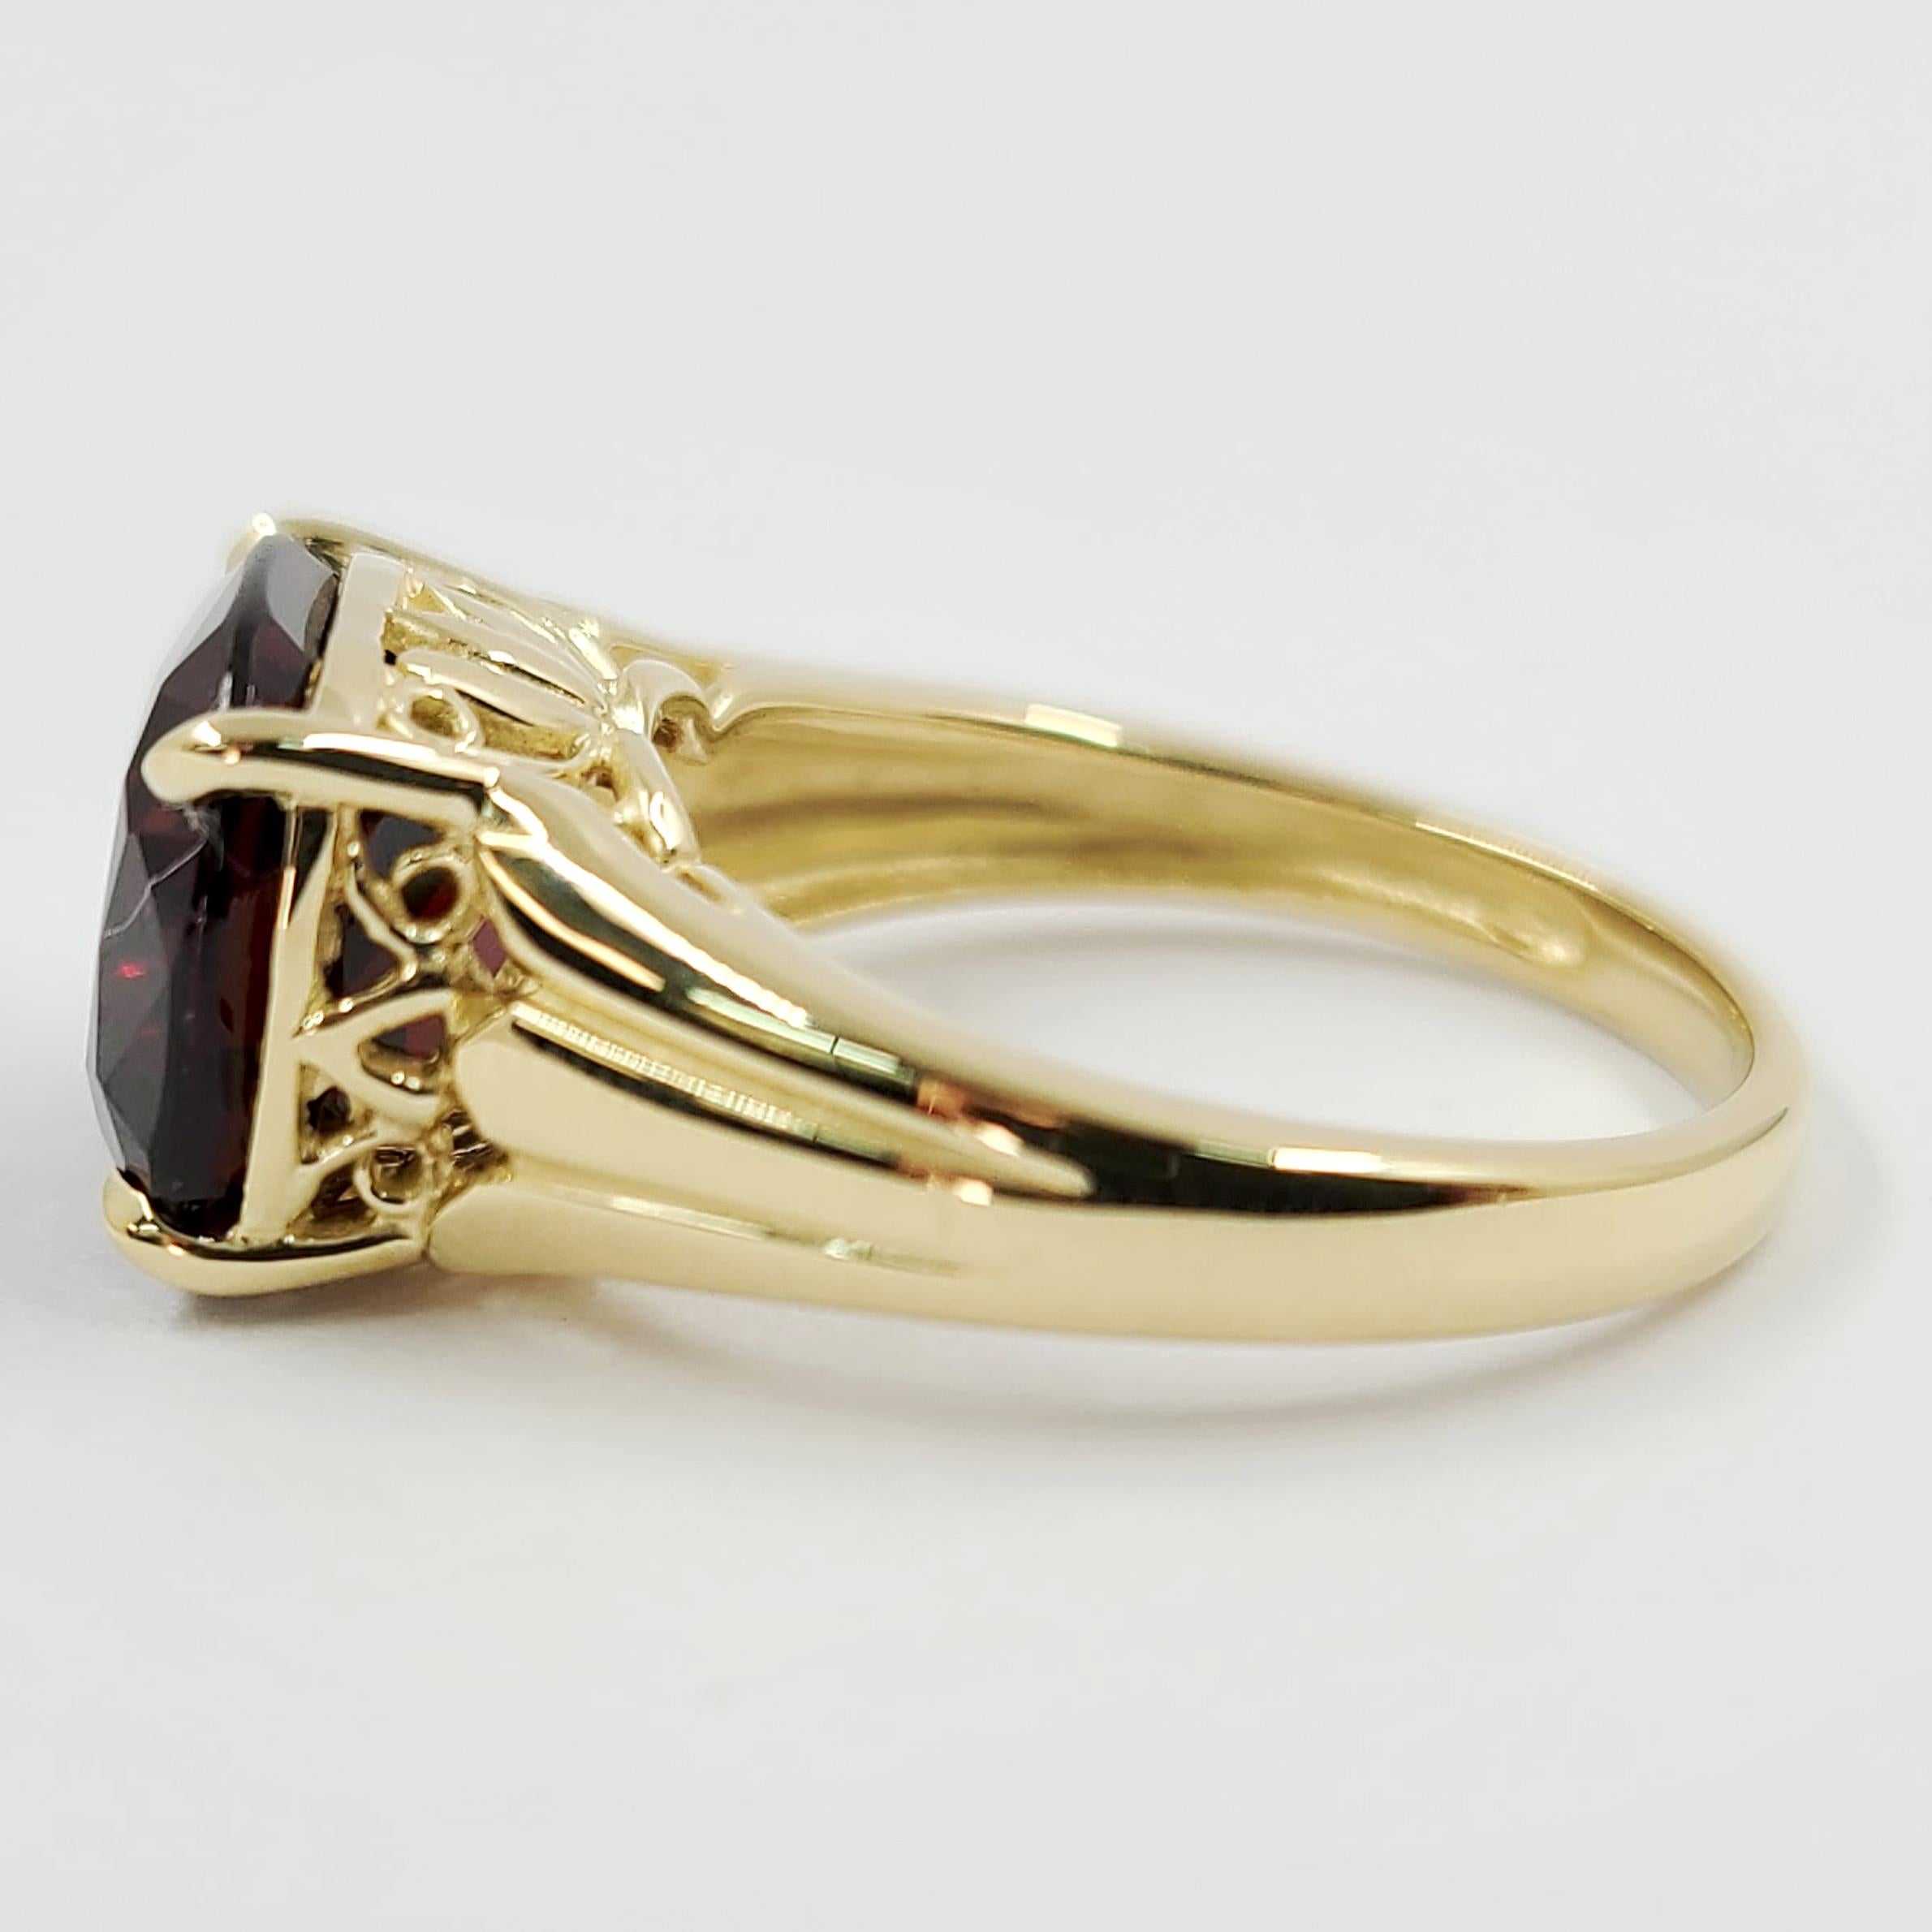 NEW 14 Karat Yellow Gold Cocktail Ring Featuring A 7.06 Carat Cushion Cut Garnet. Finished Weight is 5.3 Grams. Current Finger Size 7.25; Purchase Includes One Sizing.